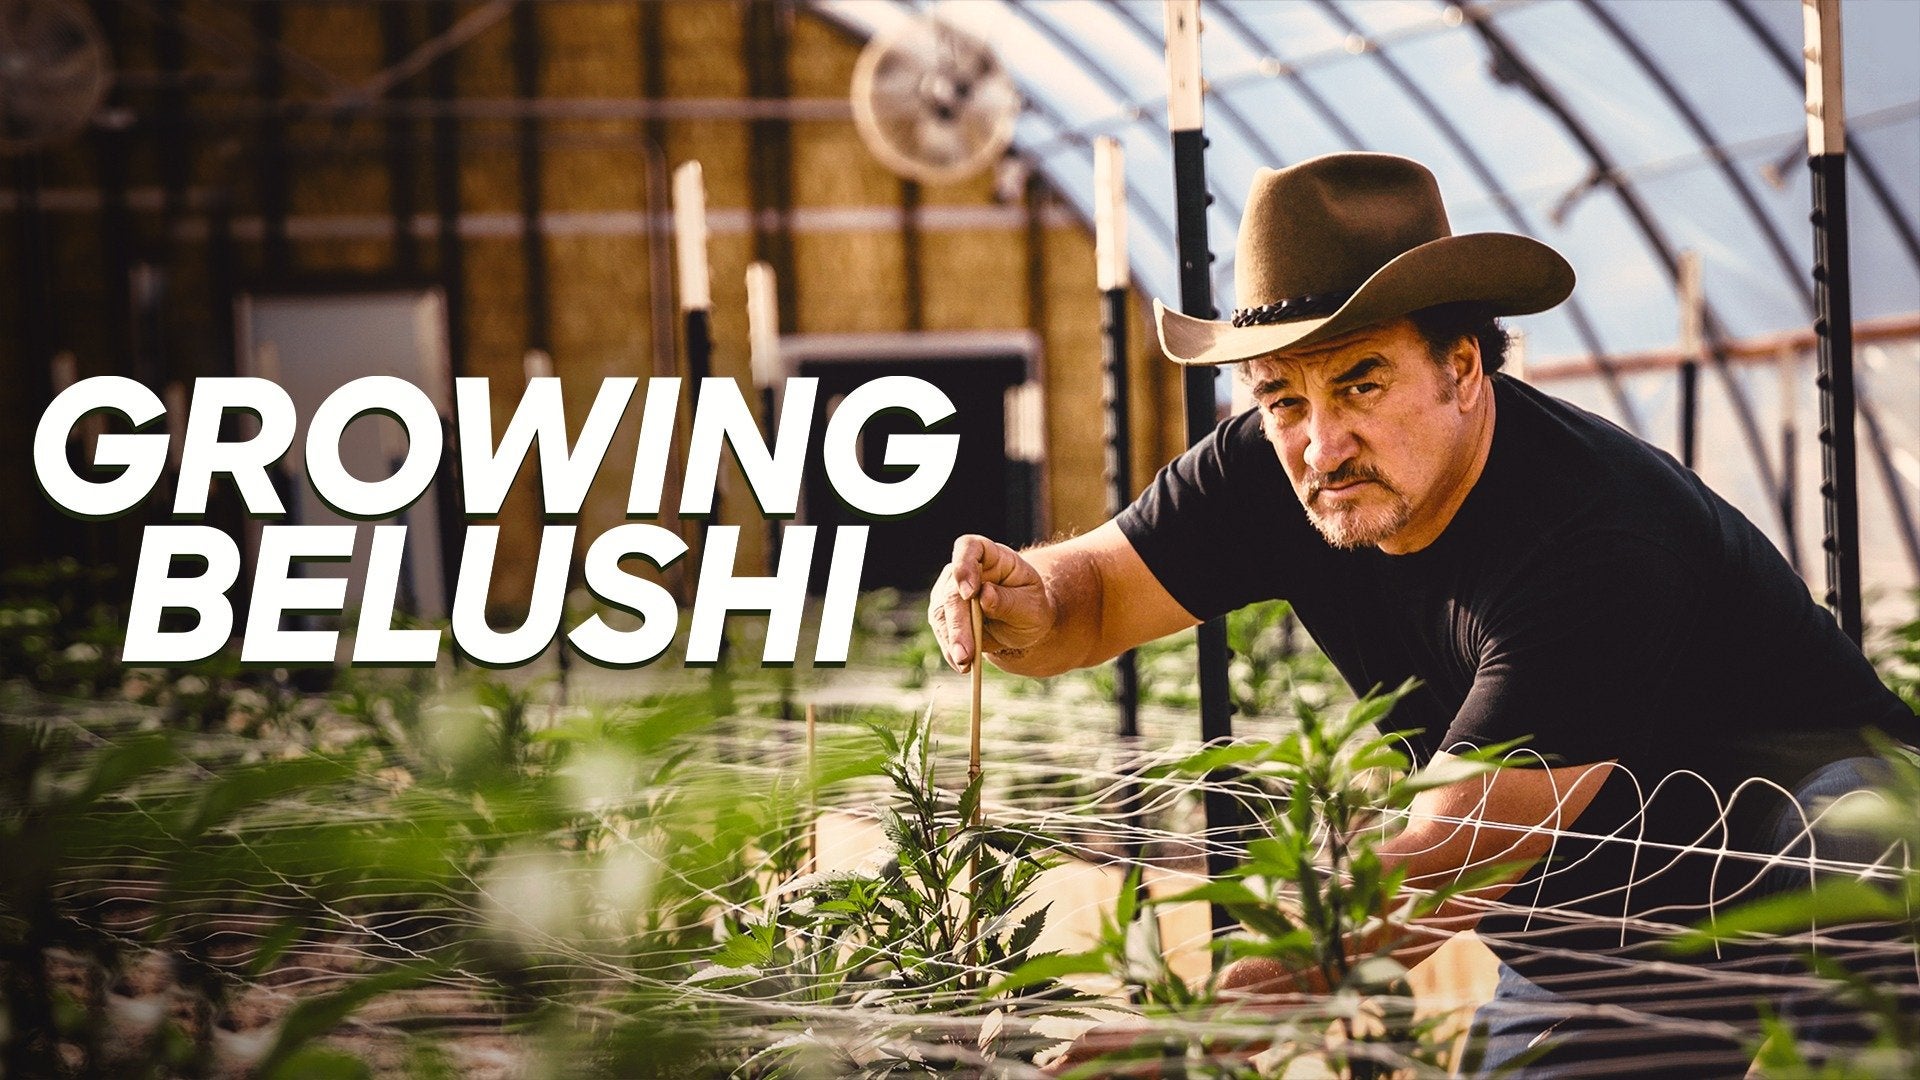 Growing Belushi S03E02 1080p  On the Road Again x265